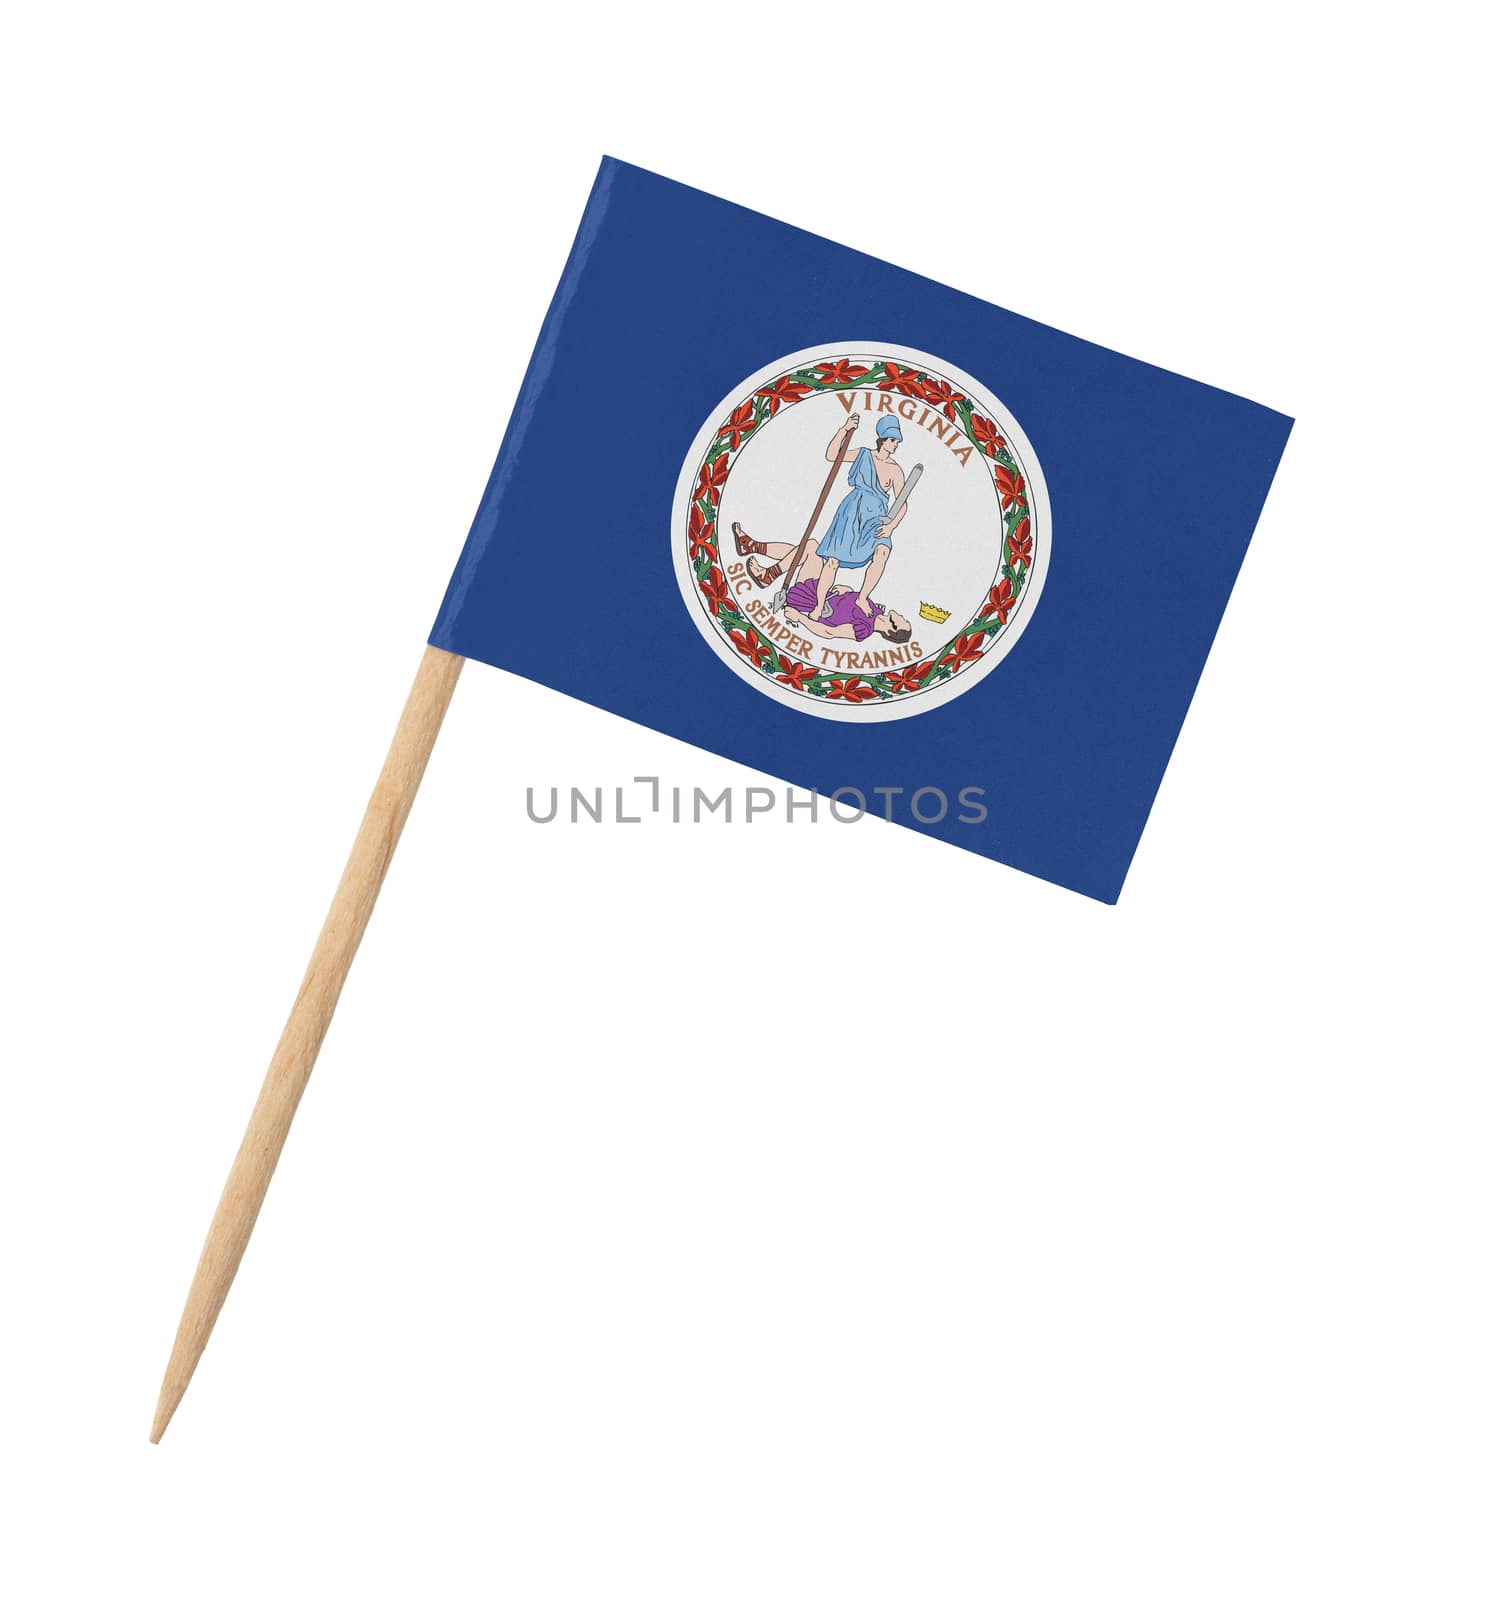 Small paper US-state flag on wooden stick - Virginia - Isolated on white